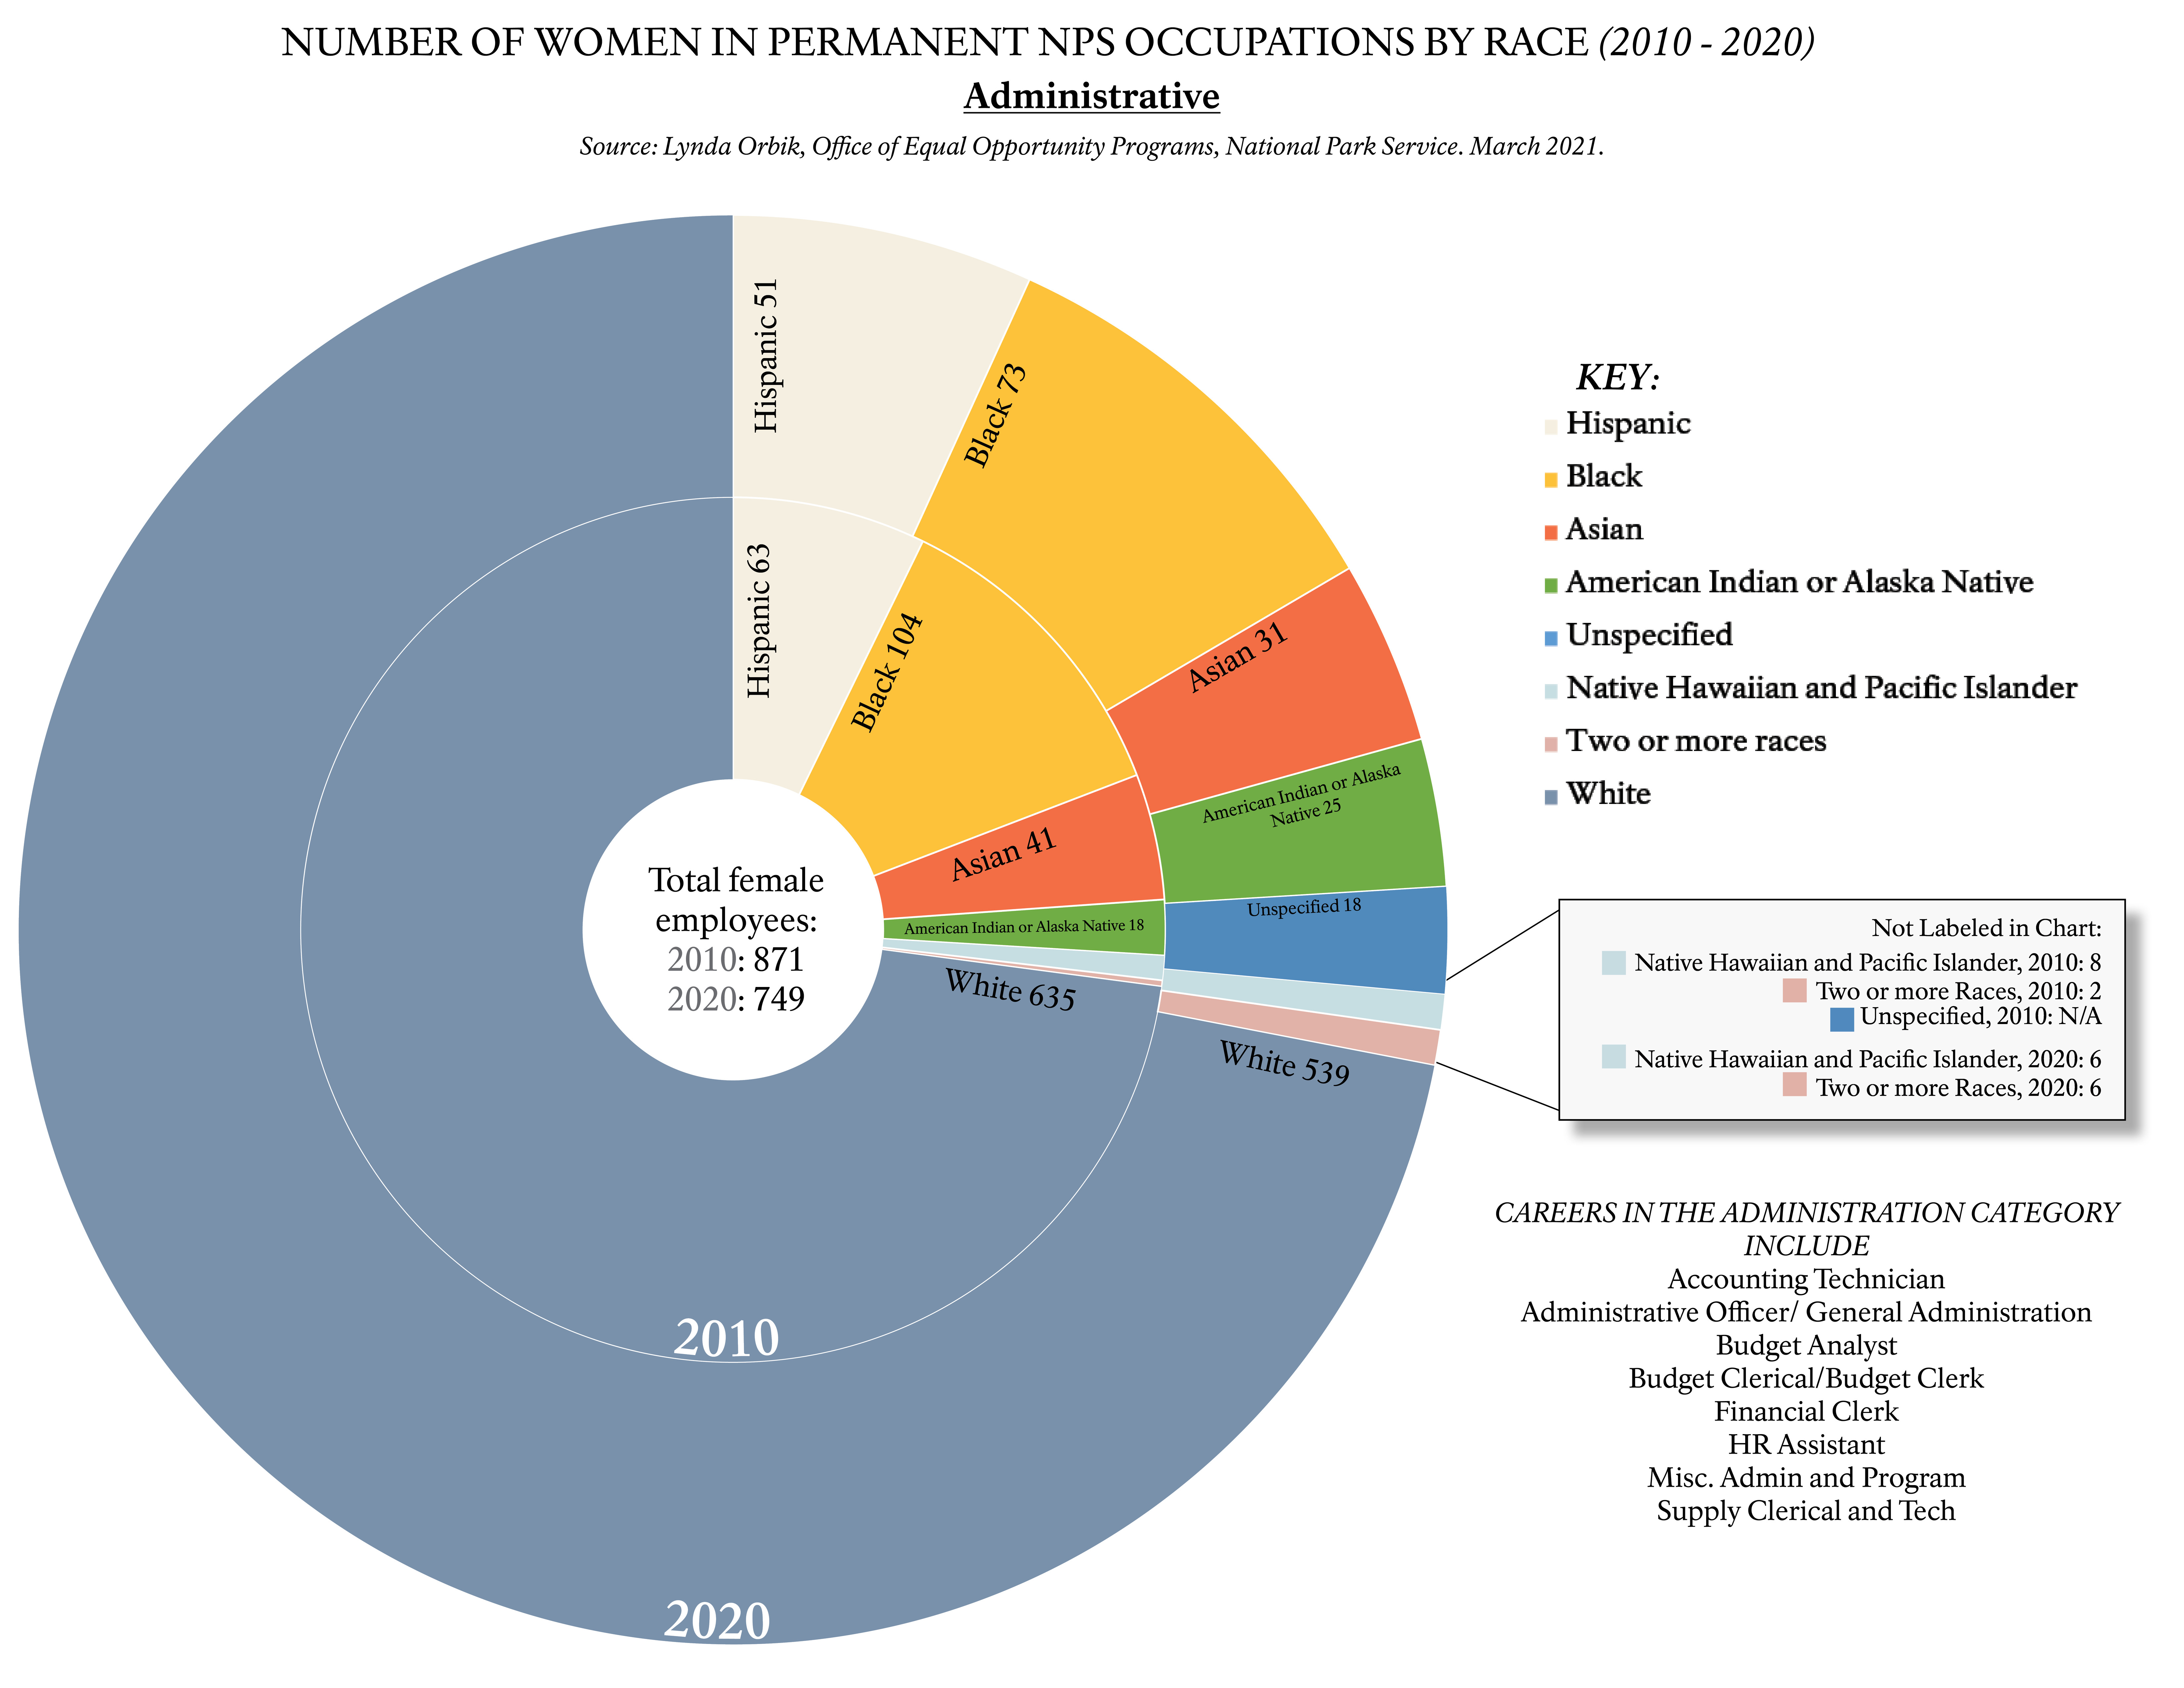 Pie chart depicting the number of women with permanent NPS positions in administrative fields, by race (2010-2020).